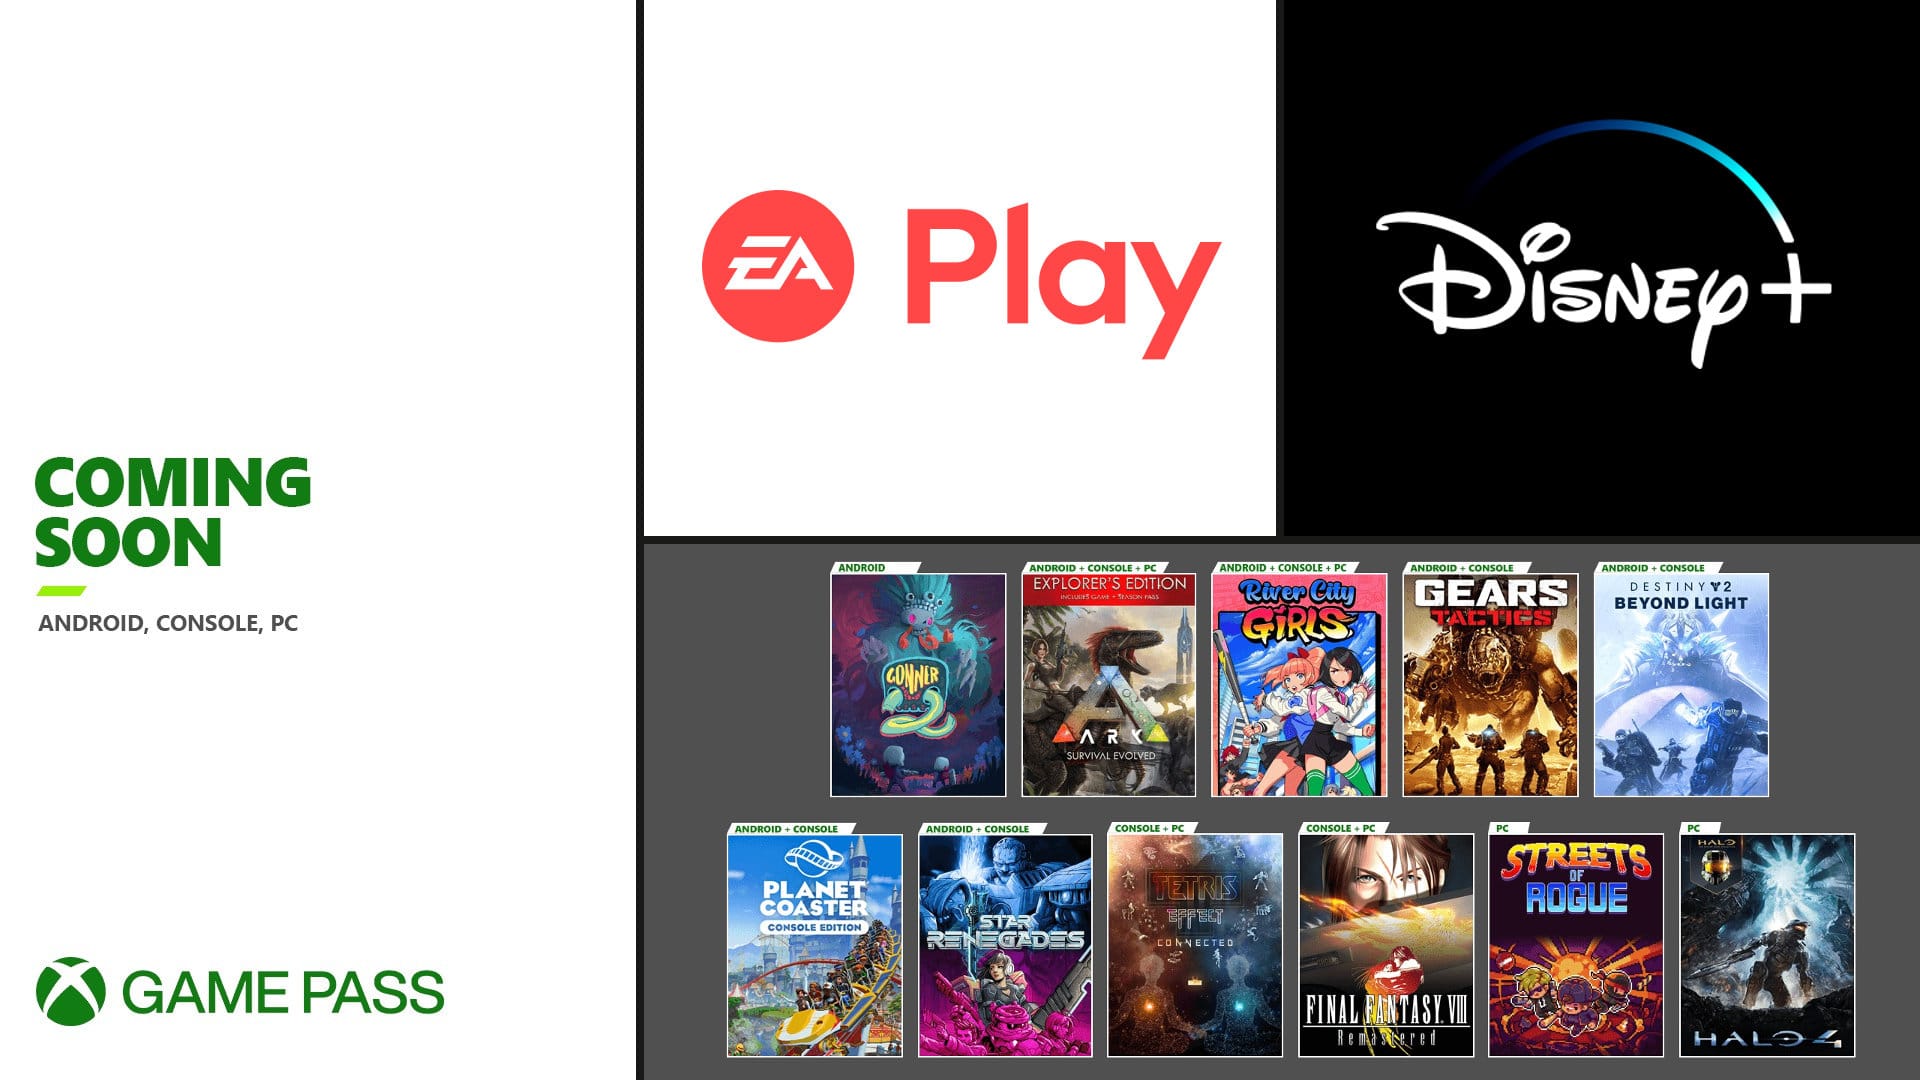 EA Play Comes to Xbox Game Pass  EA Play Comes to Xbox Game Pass